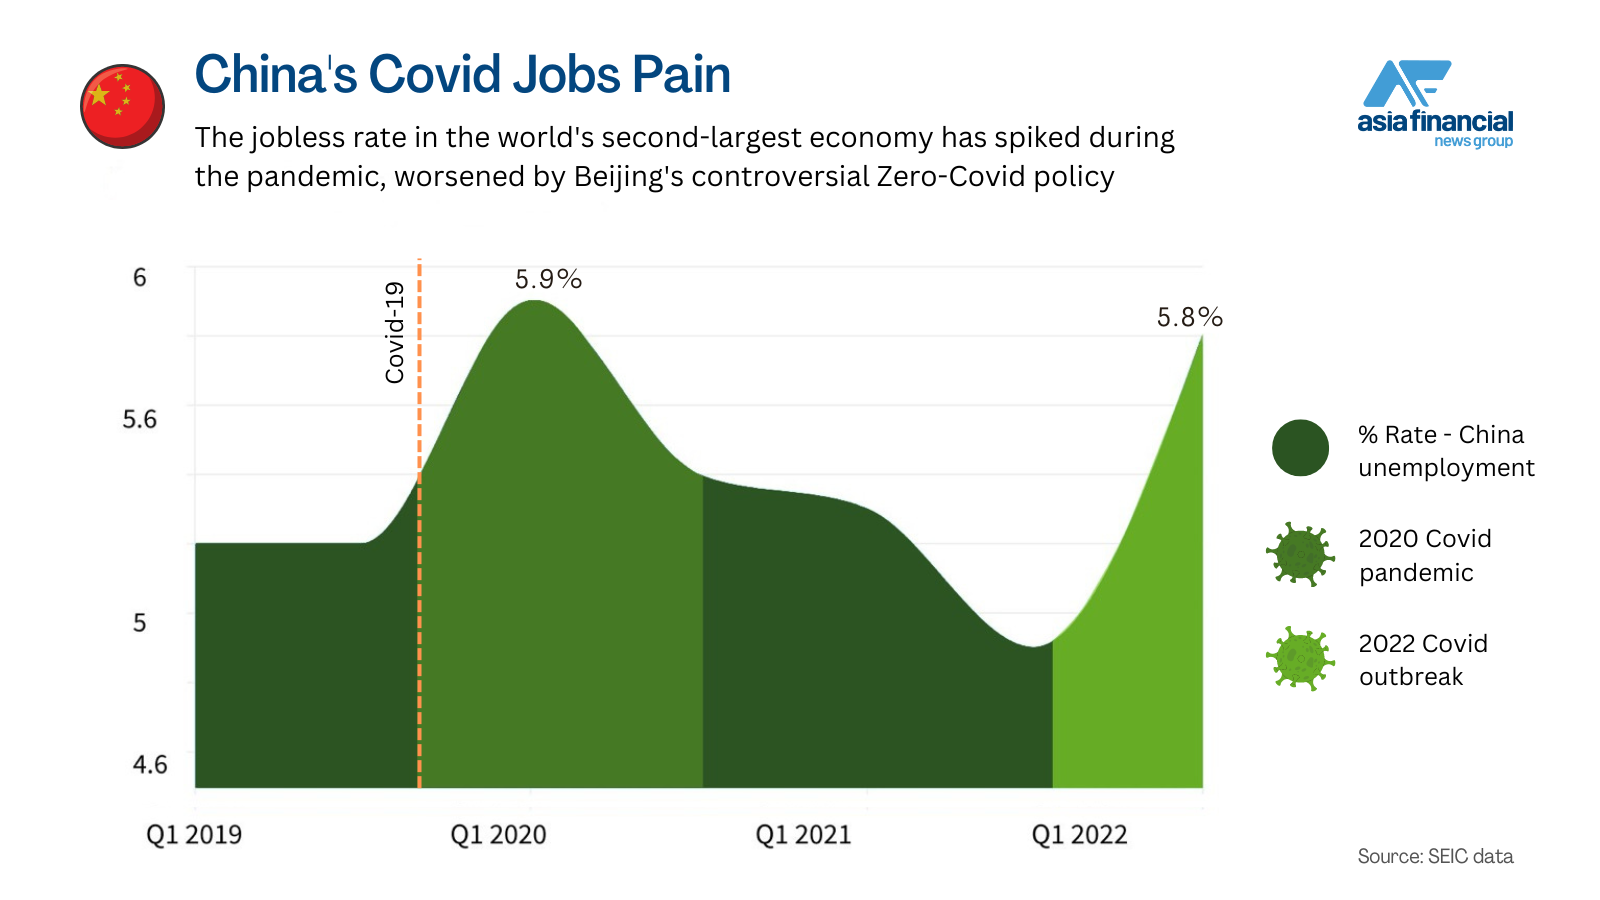 China's unemployment rate during Covid